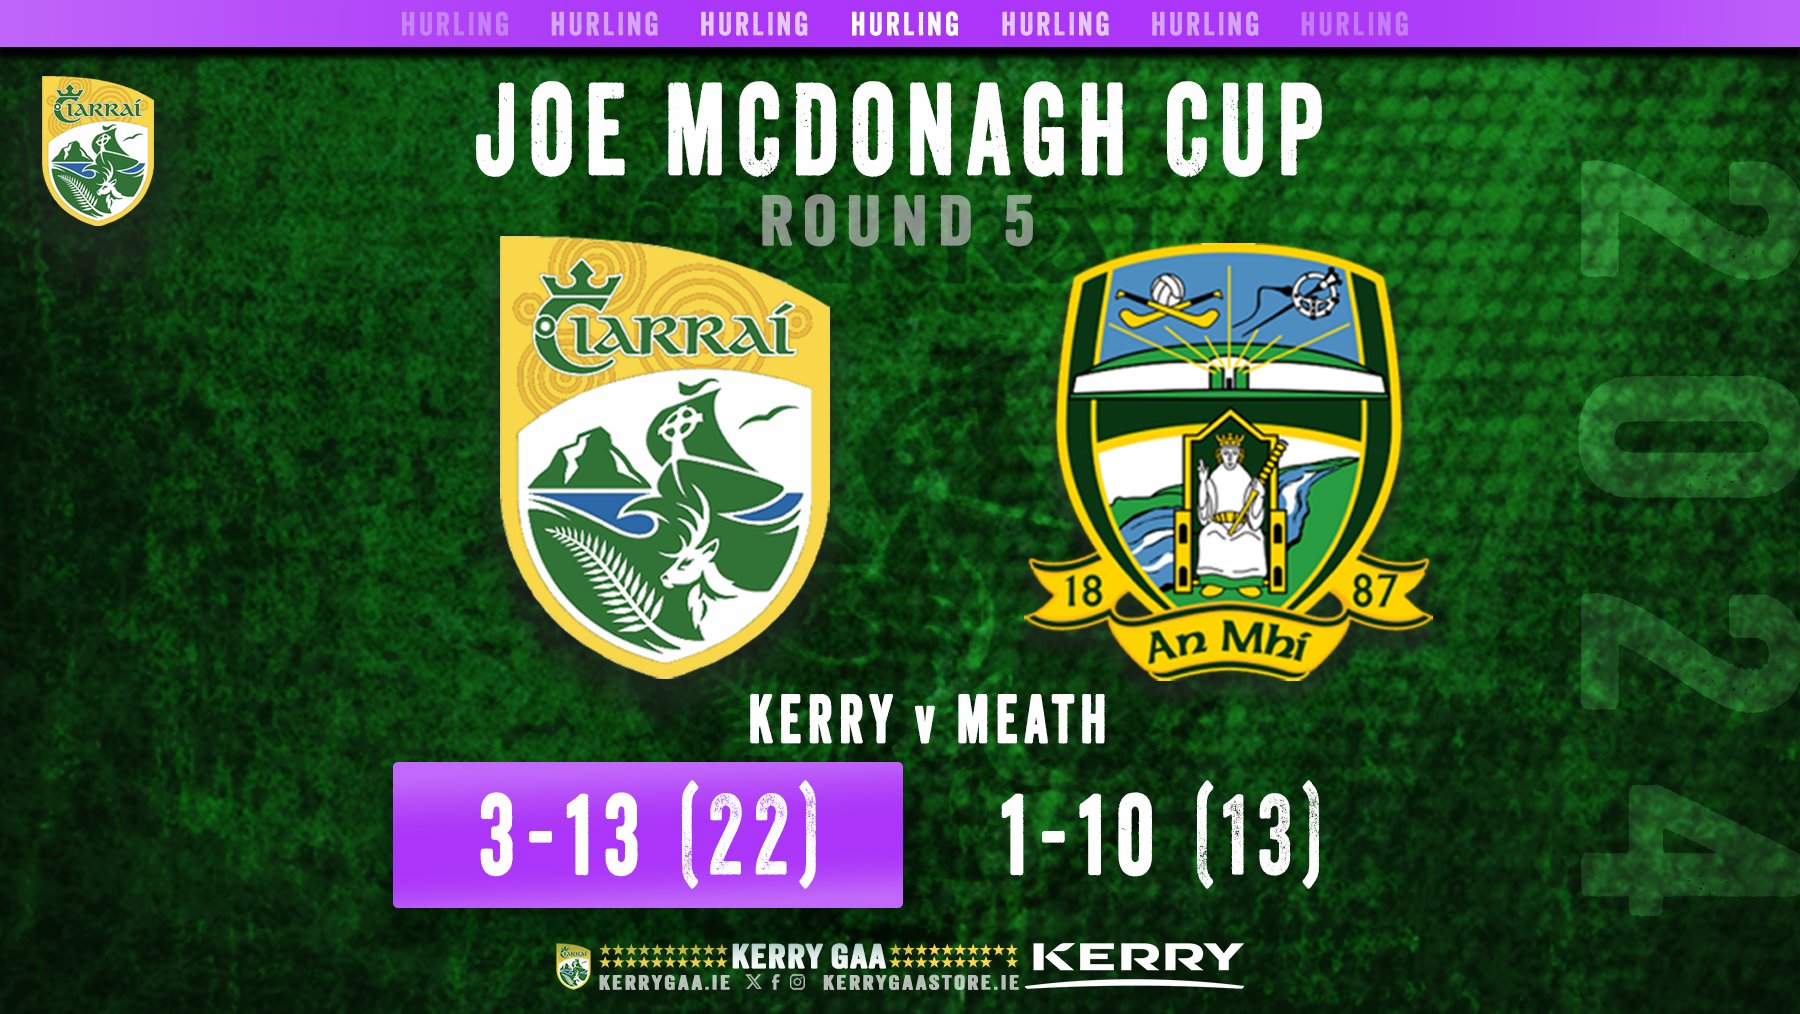 Win for Kerry over Meath in final Joe McDonagh Game